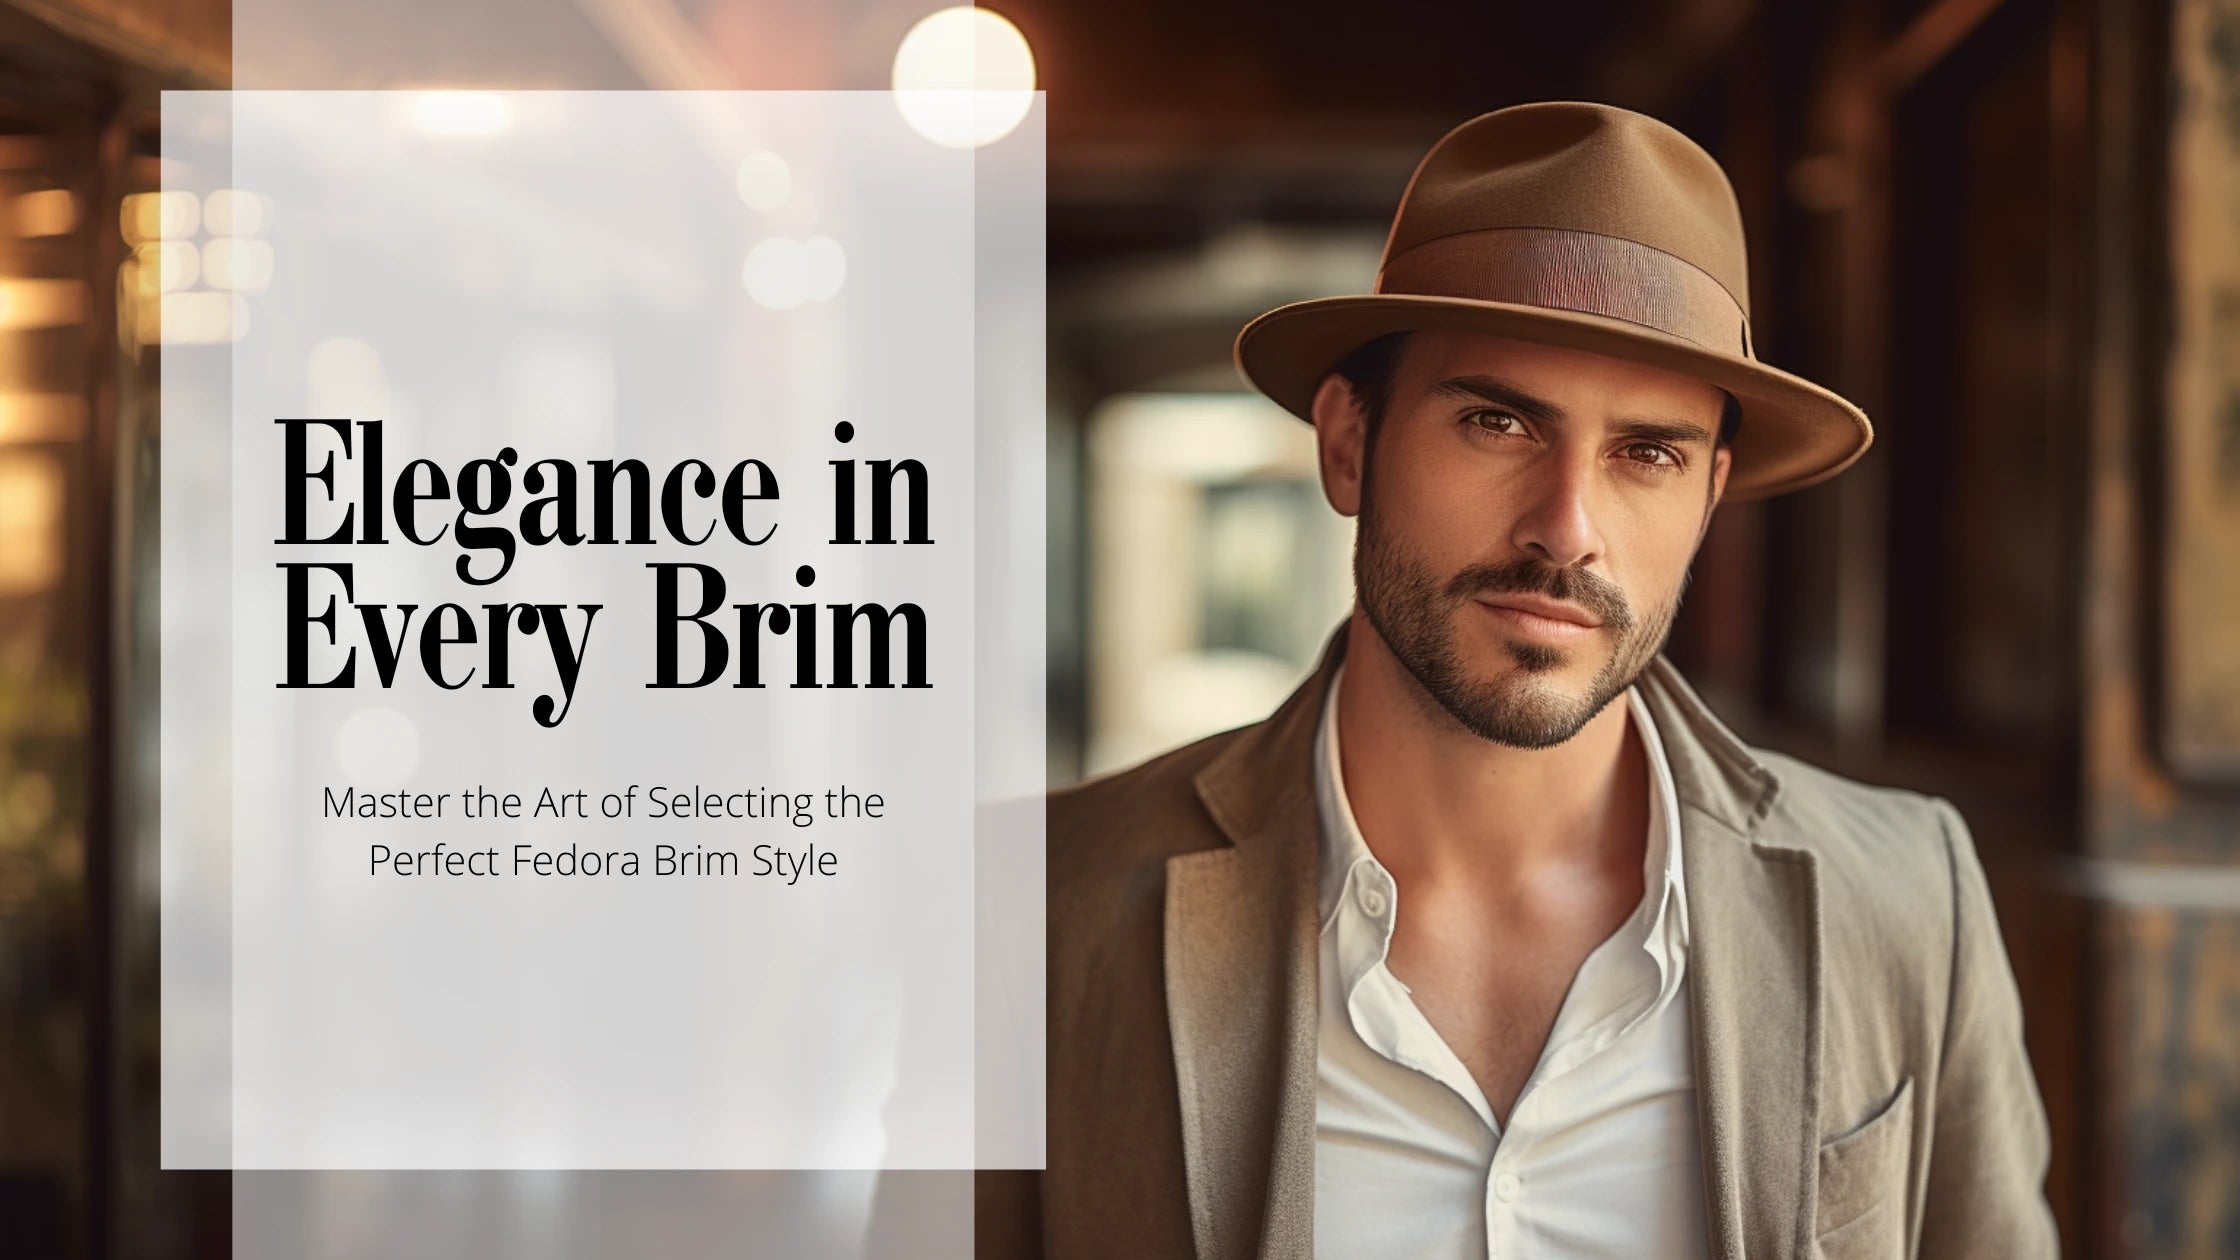 Selecting the Perfect Fedora Brim Style